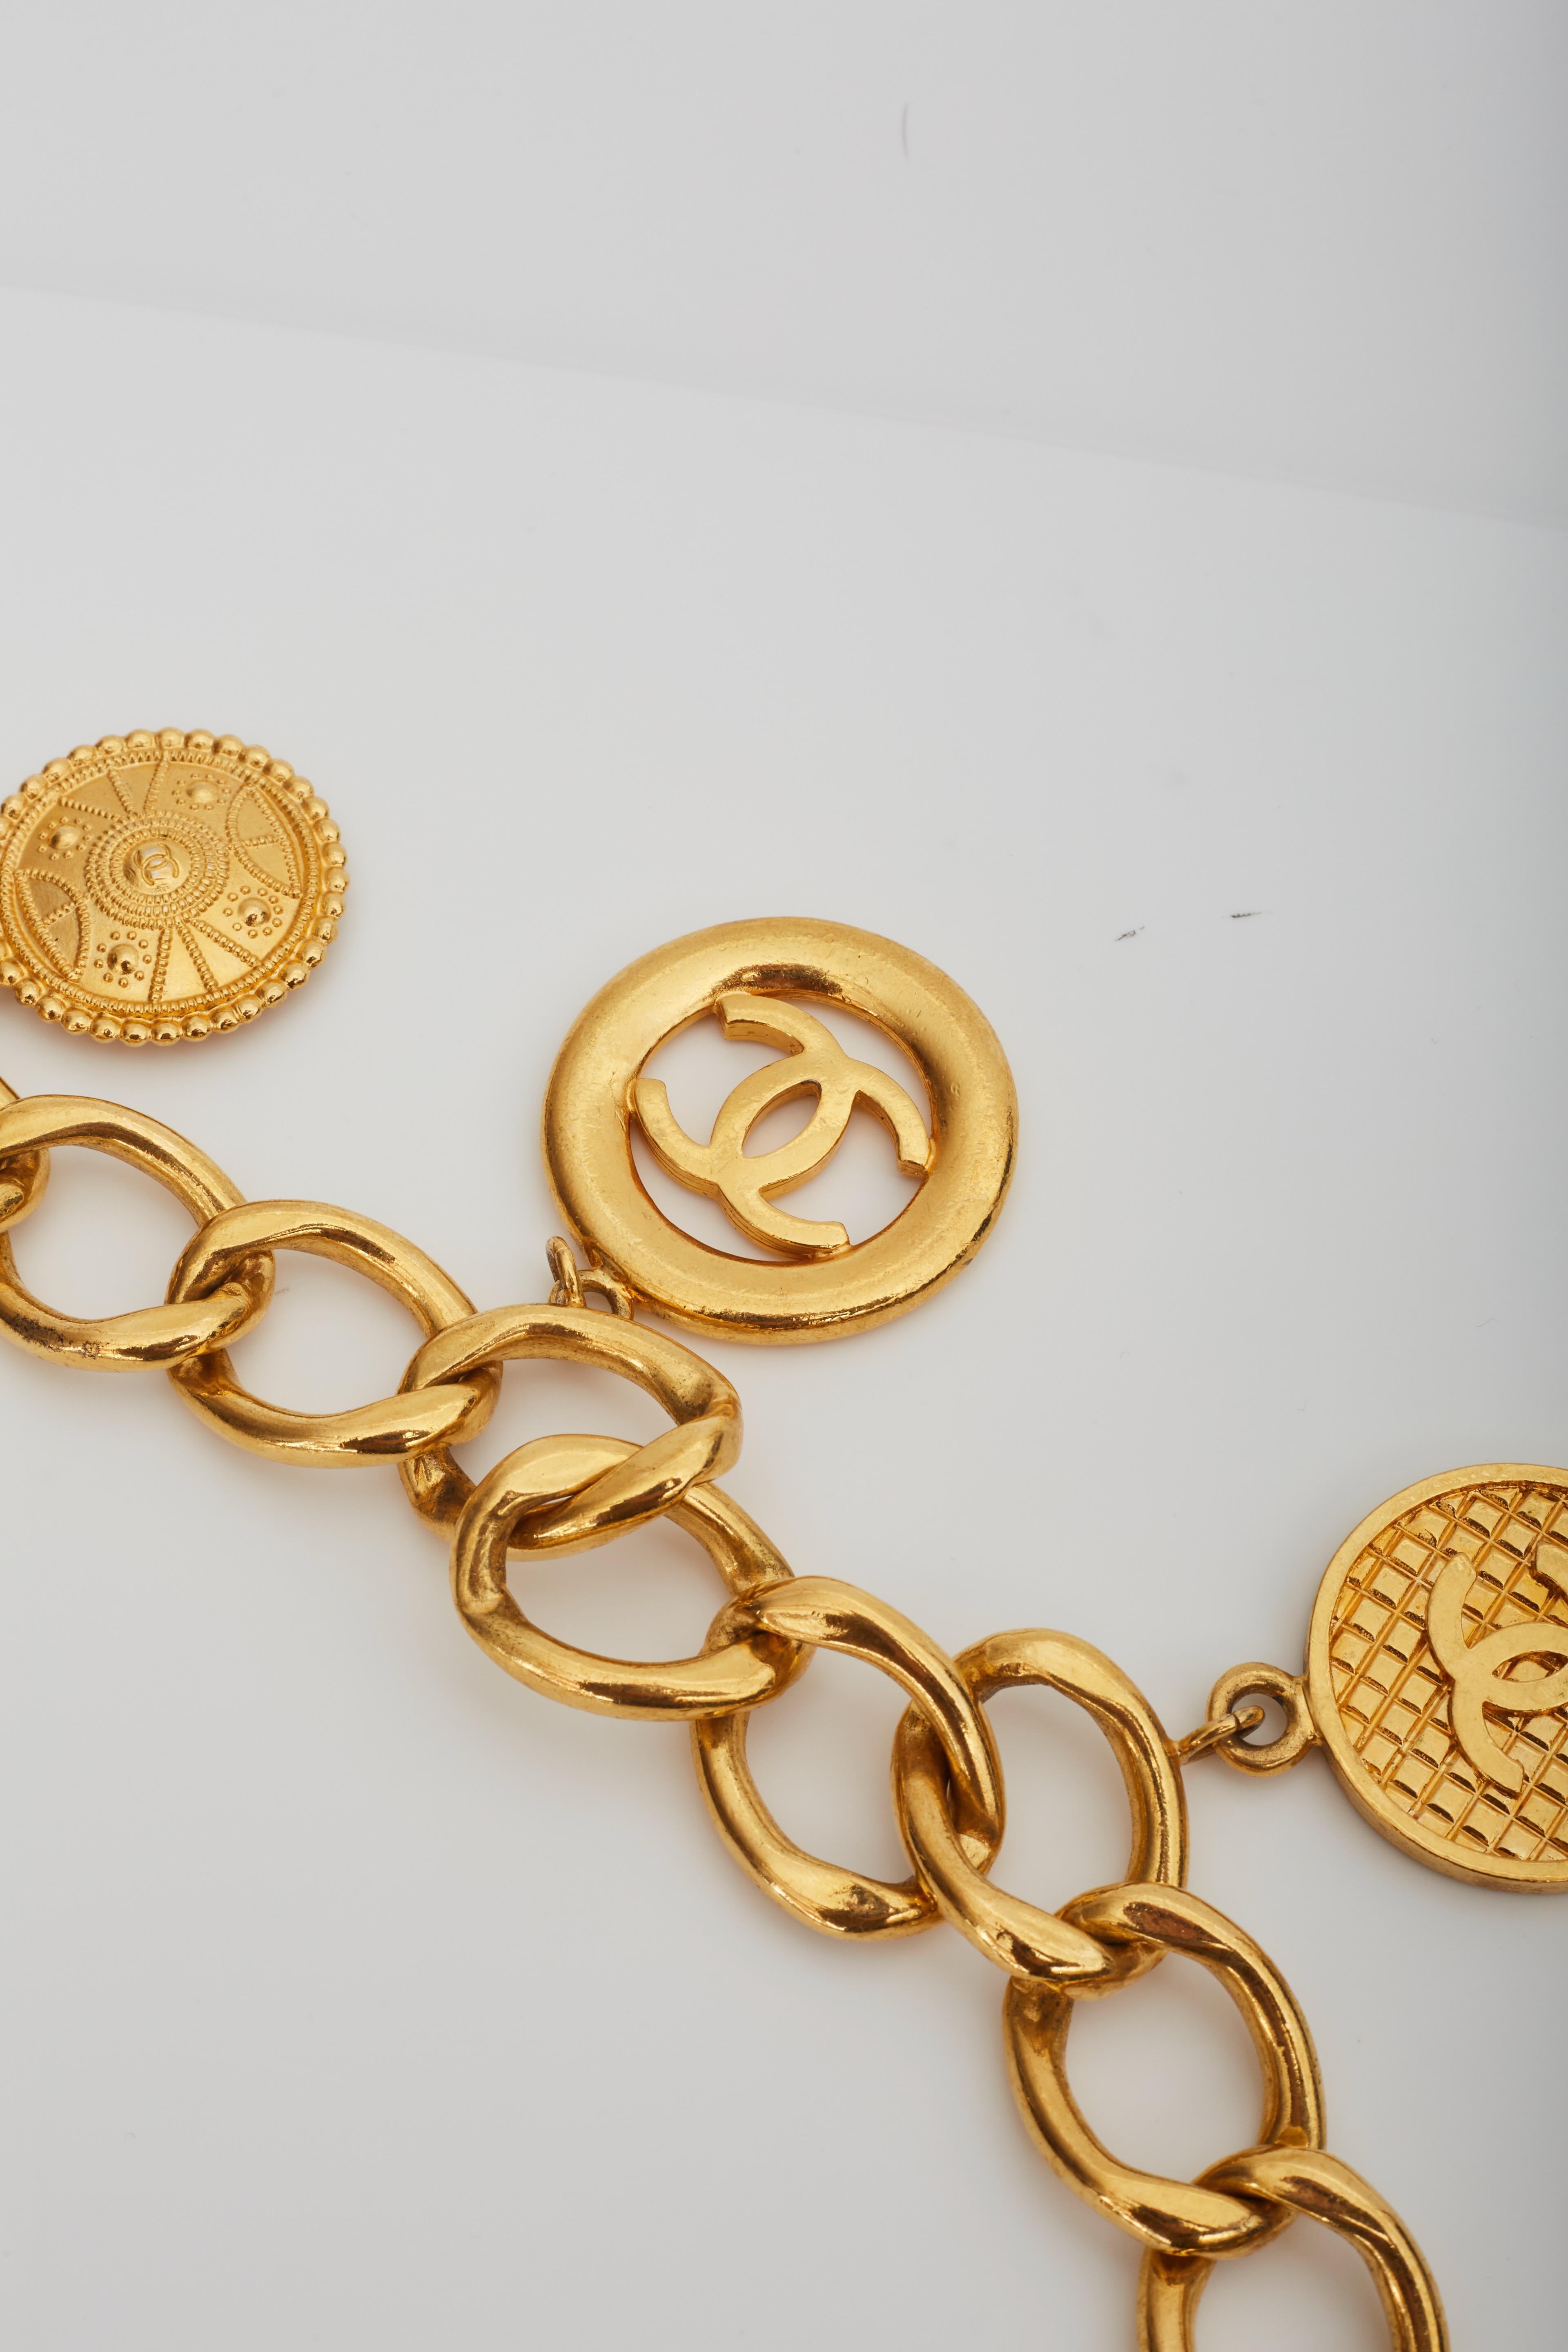 Chanel Logo Coin Medallion Charm Gold Chain Necklace Belt (1993) 26inch 6